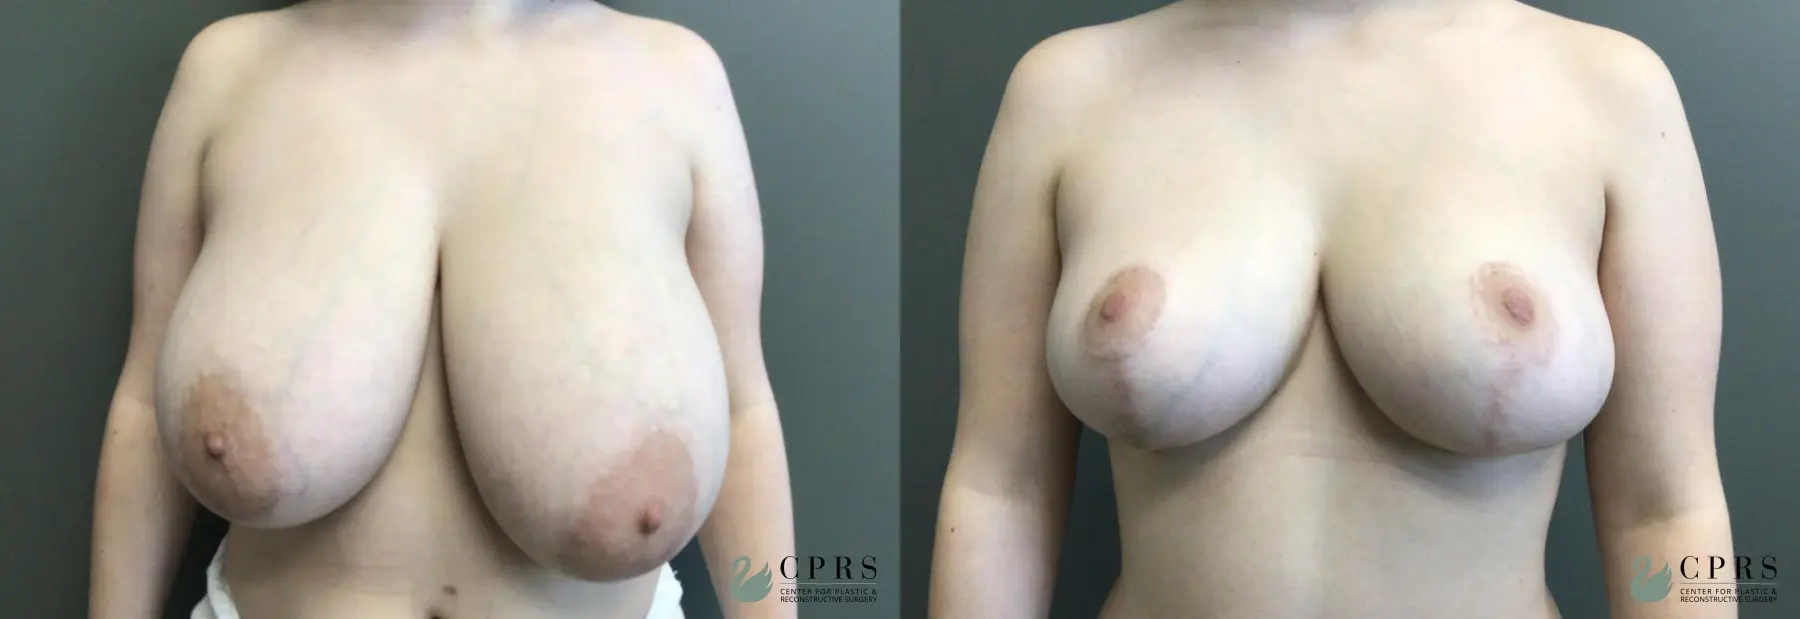 Breast Reduction: Patient 2 - Before and After  